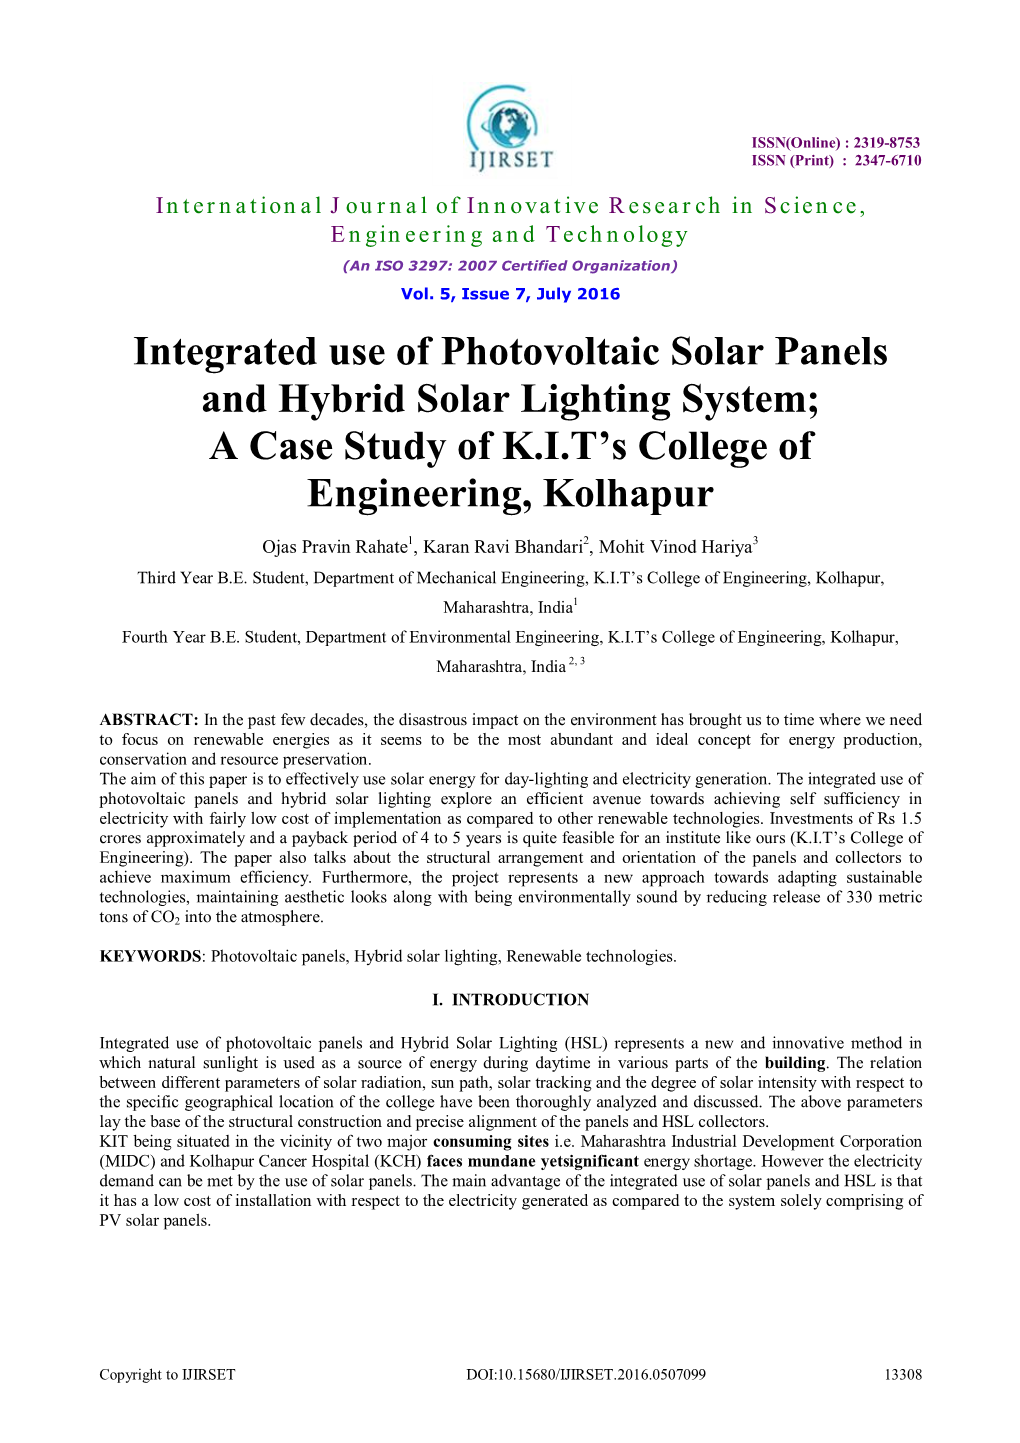 Integrated Use of Photovoltaic Solar Panels and Hybrid Solar Lighting System; a Case Study of K.I.T’S College of Engineering, Kolhapur